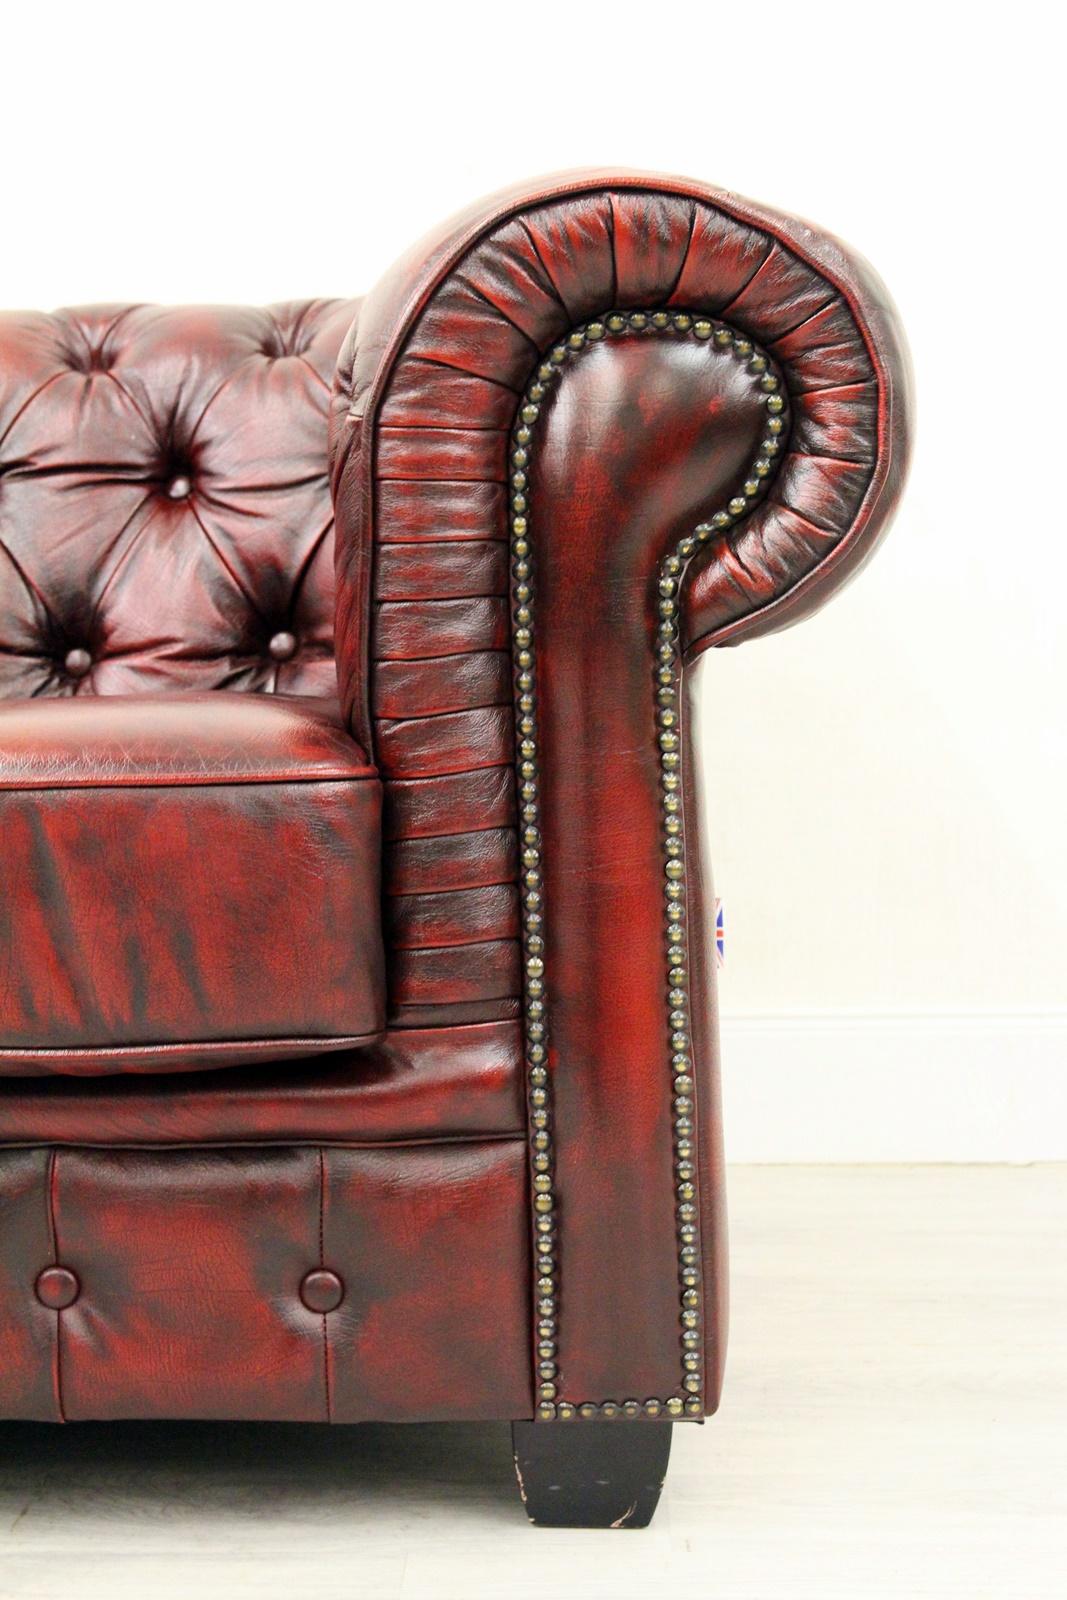 Chesterfield real leather two-seat sofa
in original design

Condition: The sofa is in good condition (patina)
sofa
Measures: Height x 78cm length x 170cm depth x 95cm
Upholstery is in good condition with patina (see photos).
Color: Oxblood /